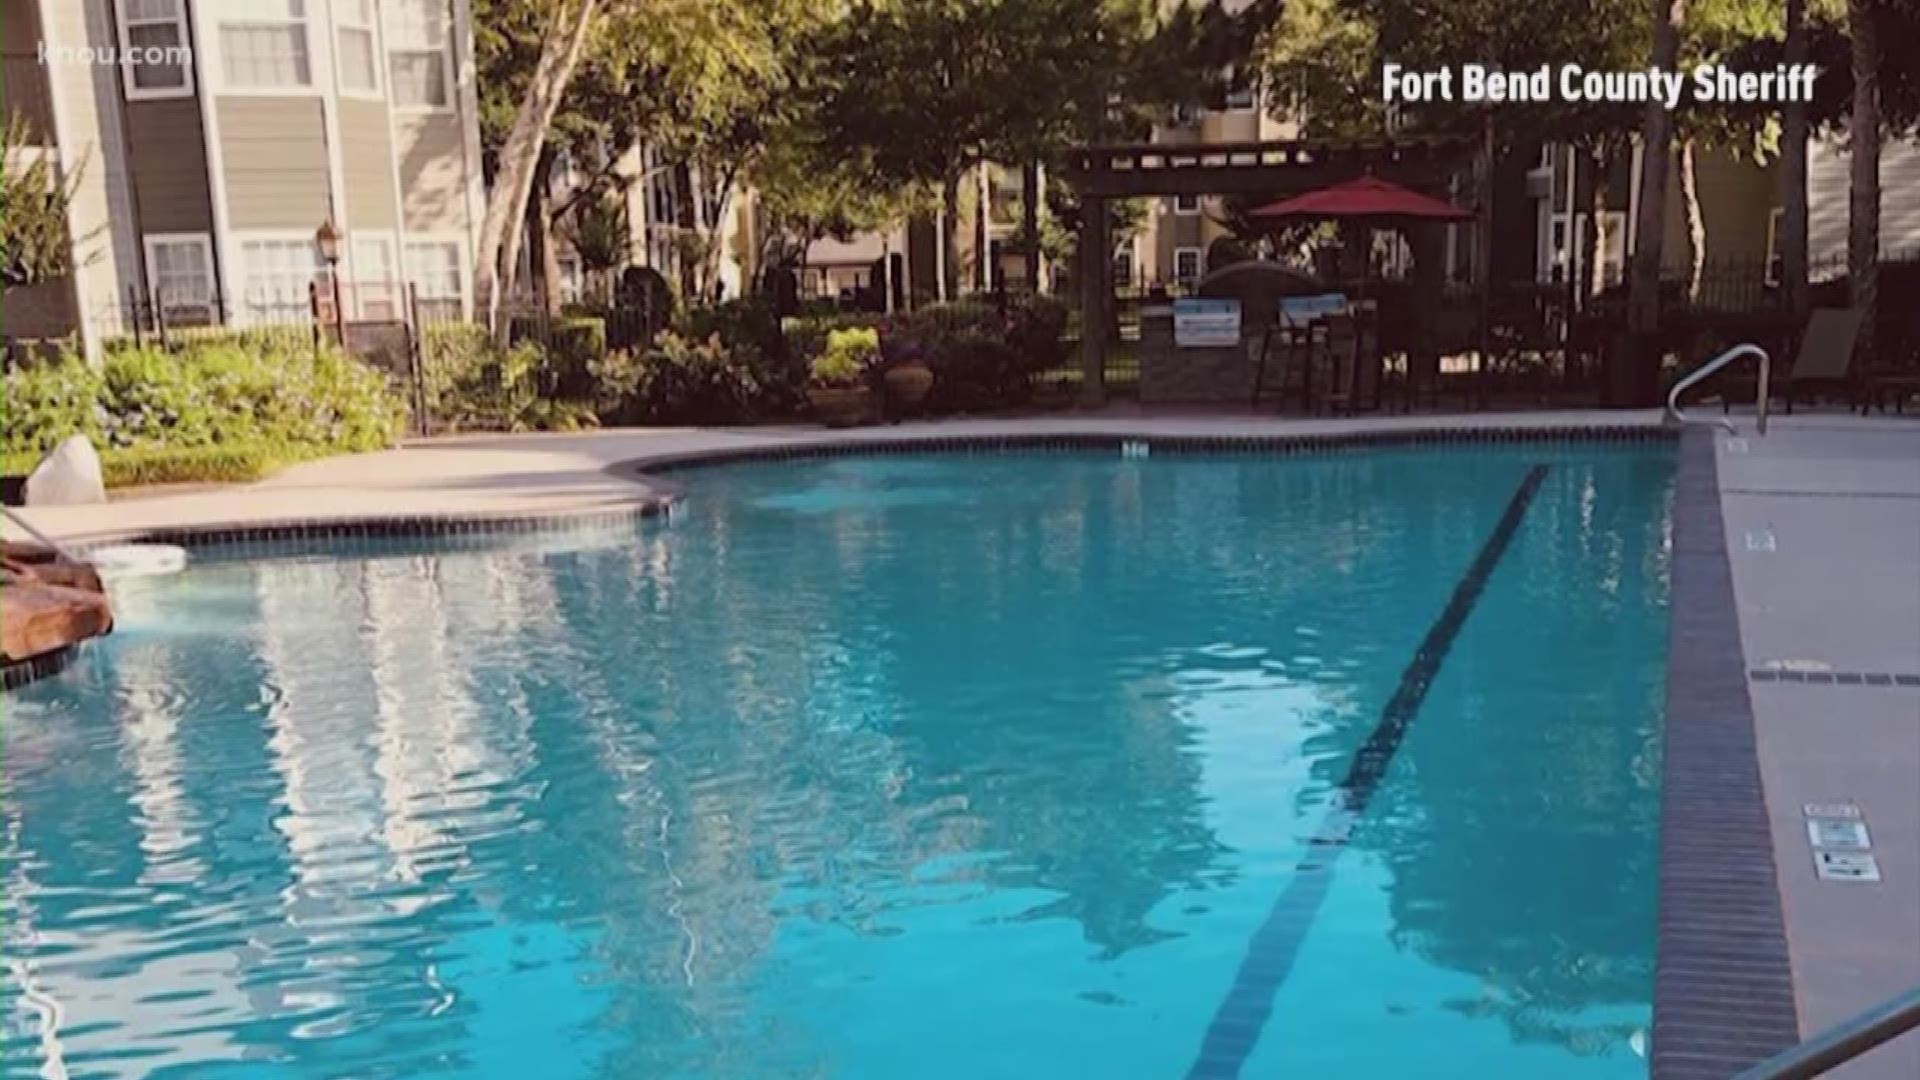 A 6-year-old boy found unconscious in a swimming pool on Friday has died, the sheriff's office confirms. That makes three children who have drowned in the past week in the Houston area.